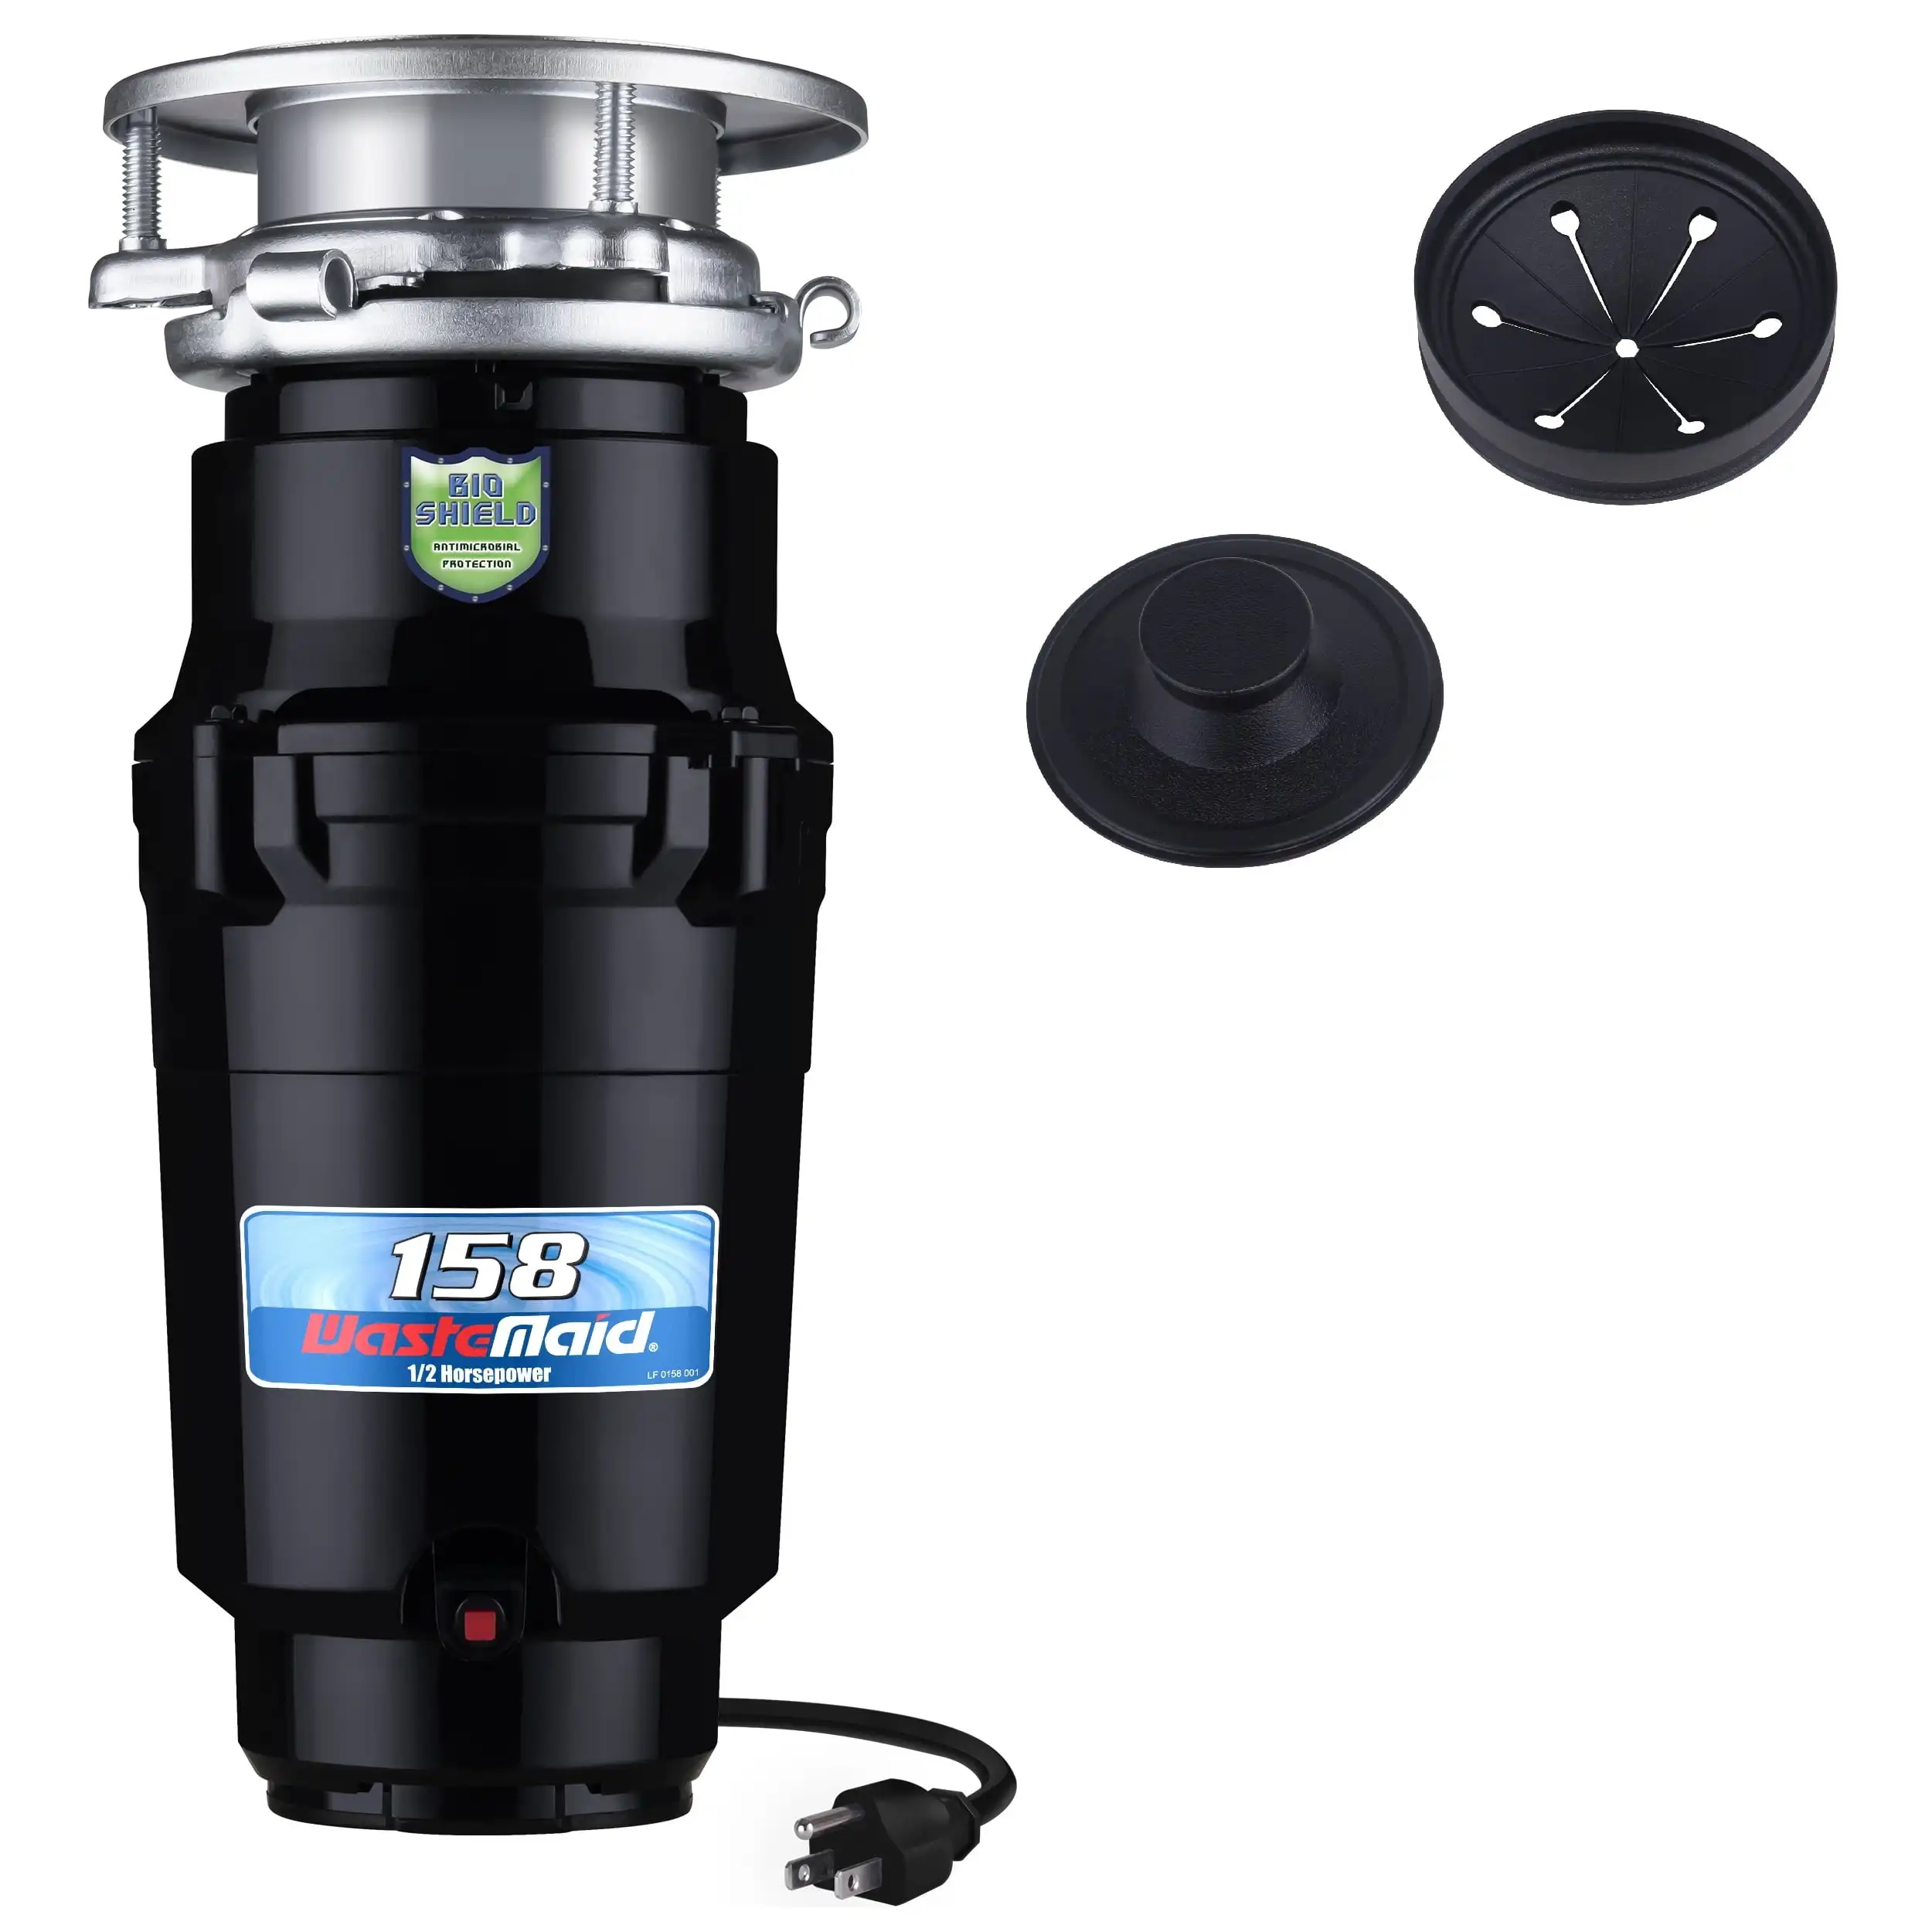 

Waste Maid Standard 1/2 HP Continuous Feed Garbage Disposal 10-US-WM-158-3B Kitchen Appliance .USA.NEW